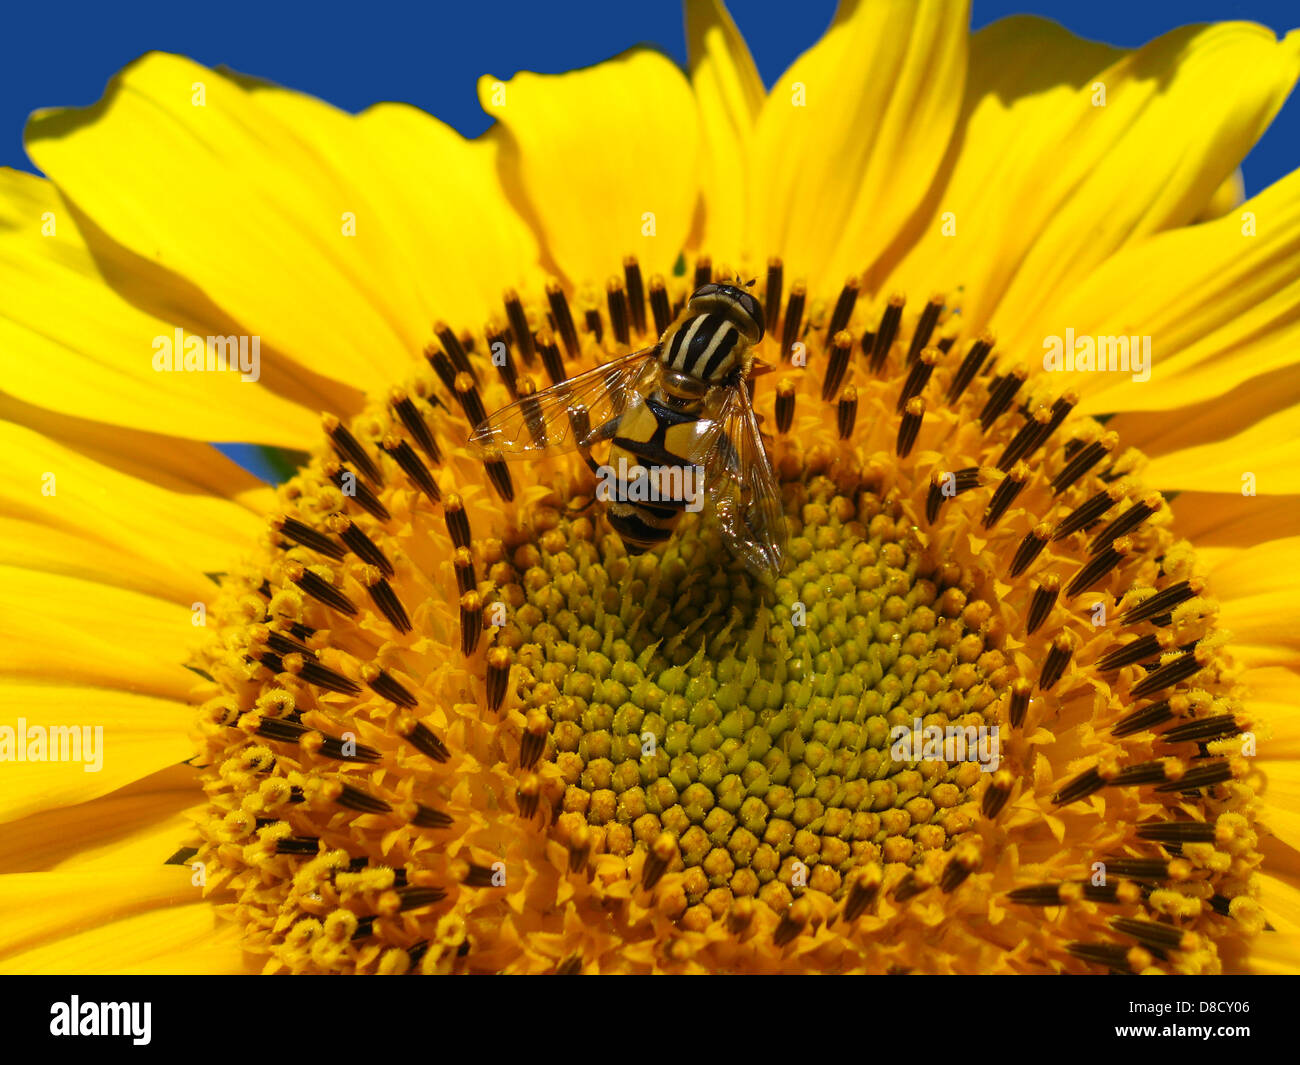 The yellow fly on a yellow sunflower on the sky background Stock Photo